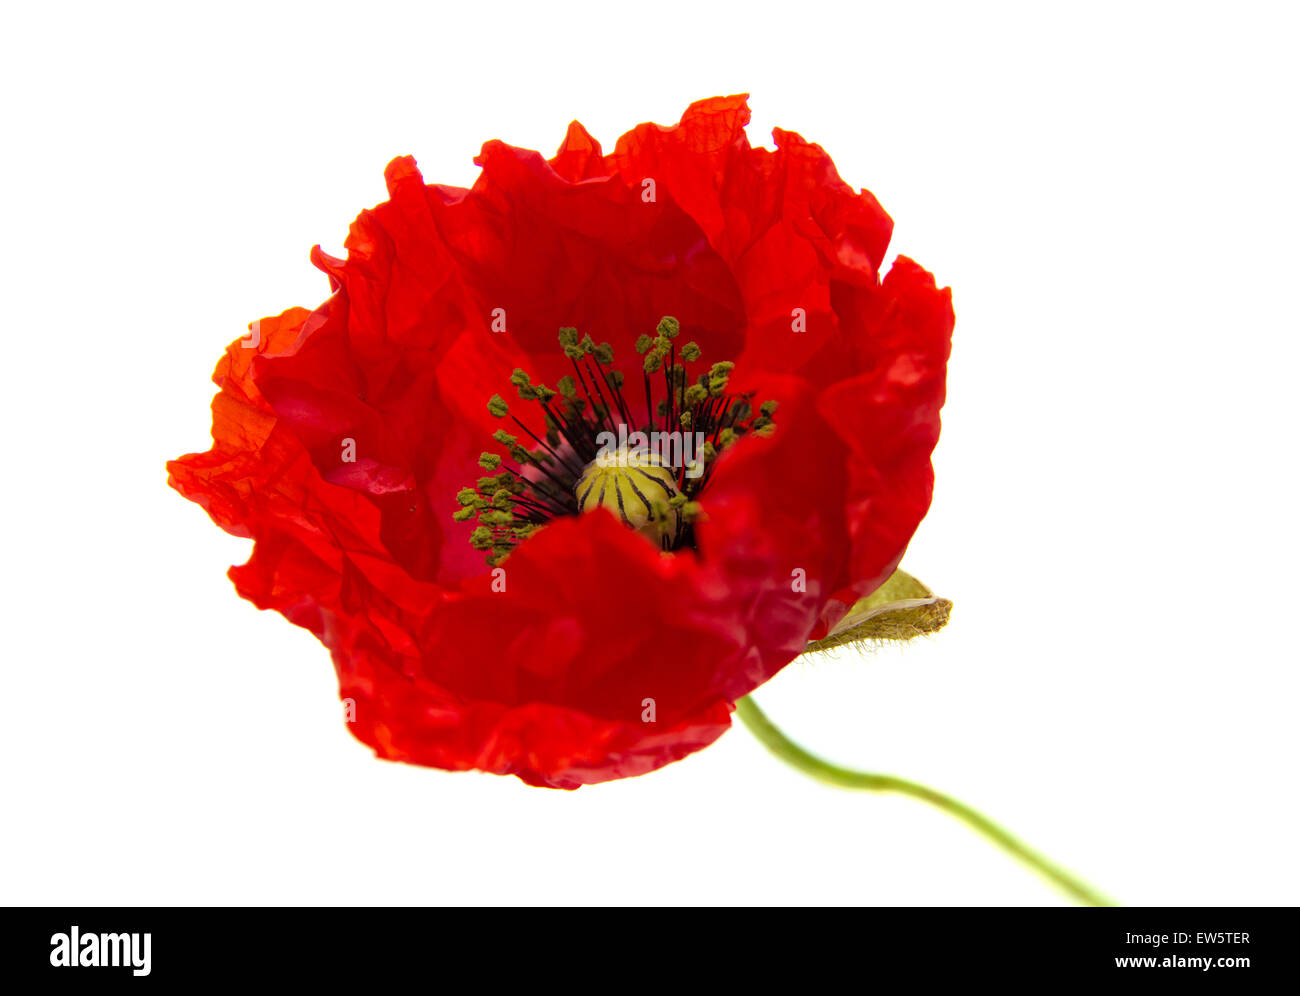 Bright red poppy, opening flower isolated on white background Stock Photo